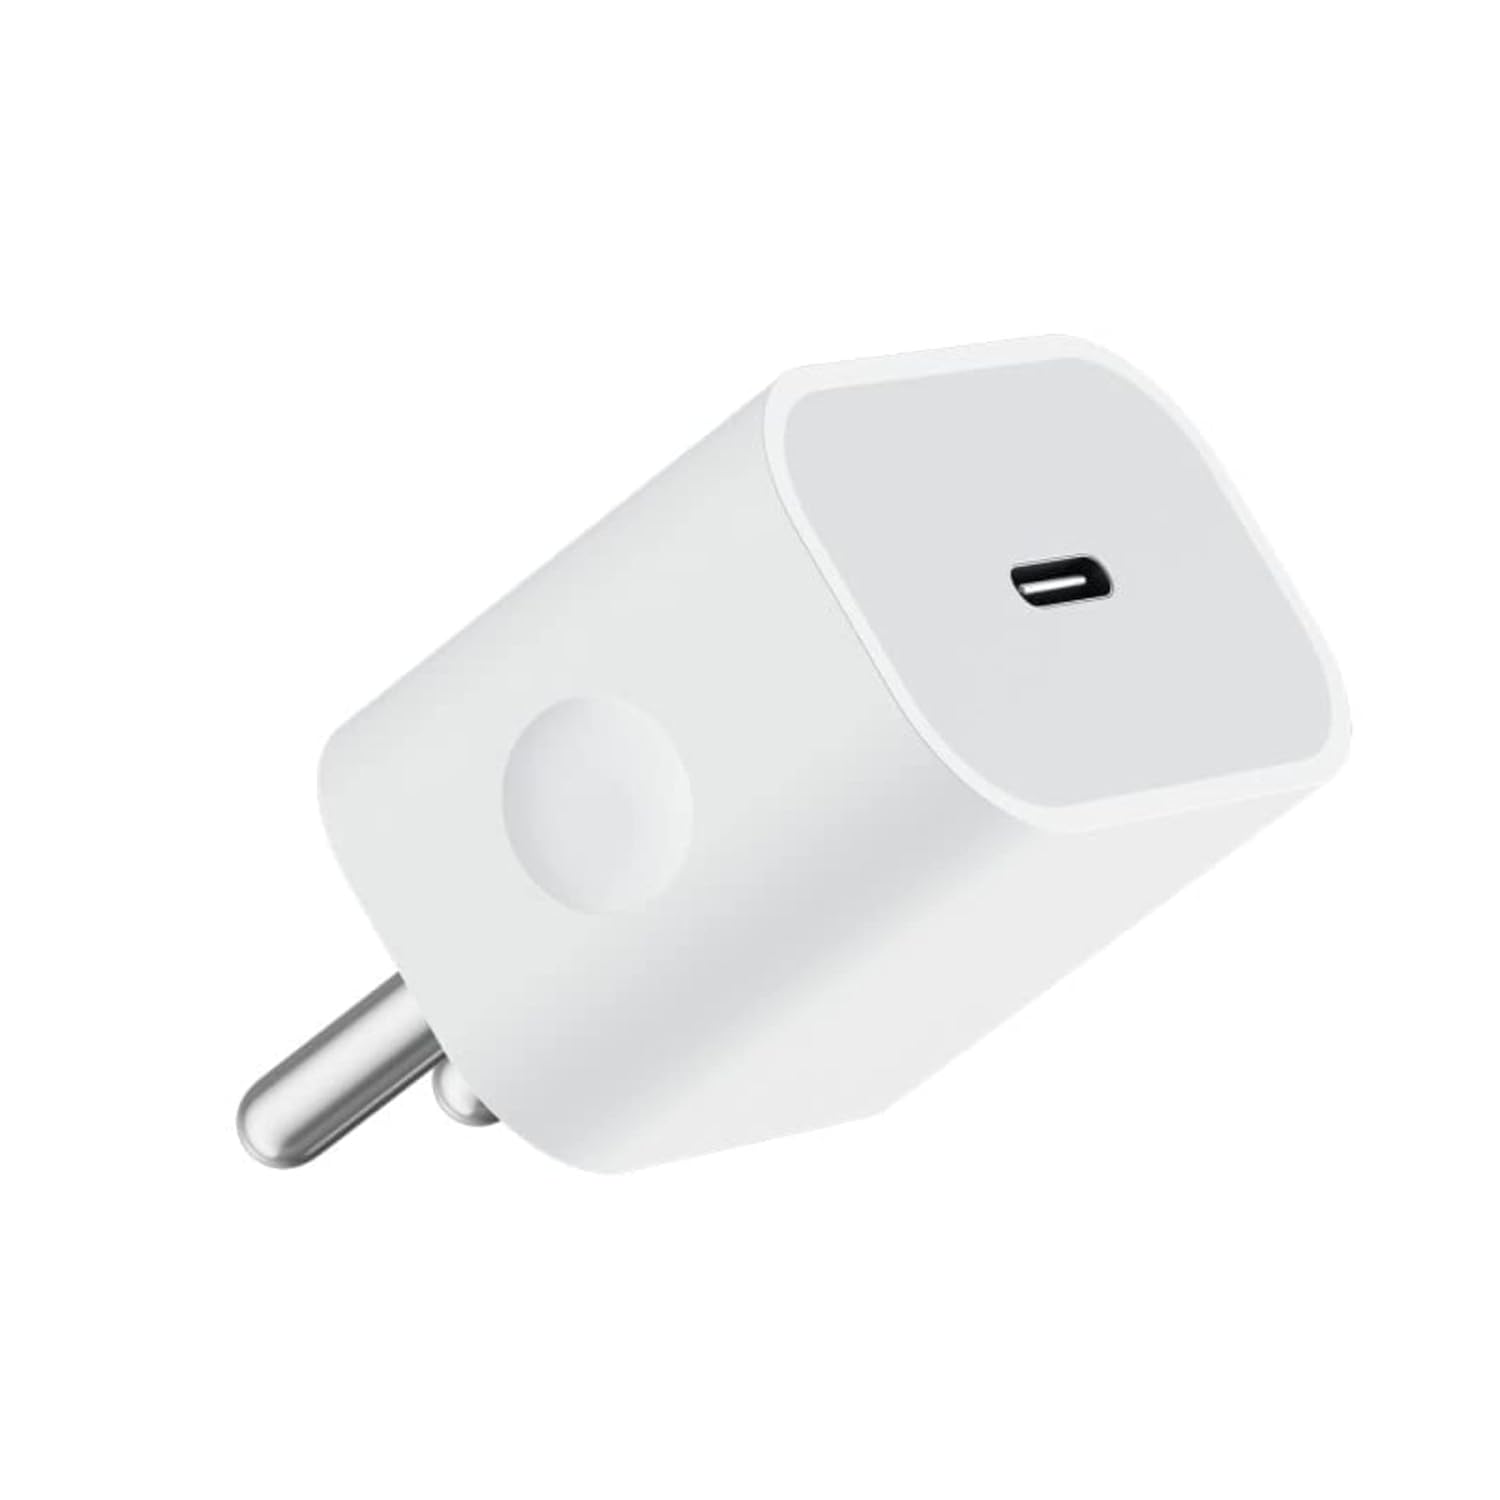 Mcare MXC-20 Type C Output Smart C Type Charging Adapter, Multi-Layer Protection, BIS Certified, Fast Charging Power Adaptor Without Cable for All iOS & Android Devices (White)